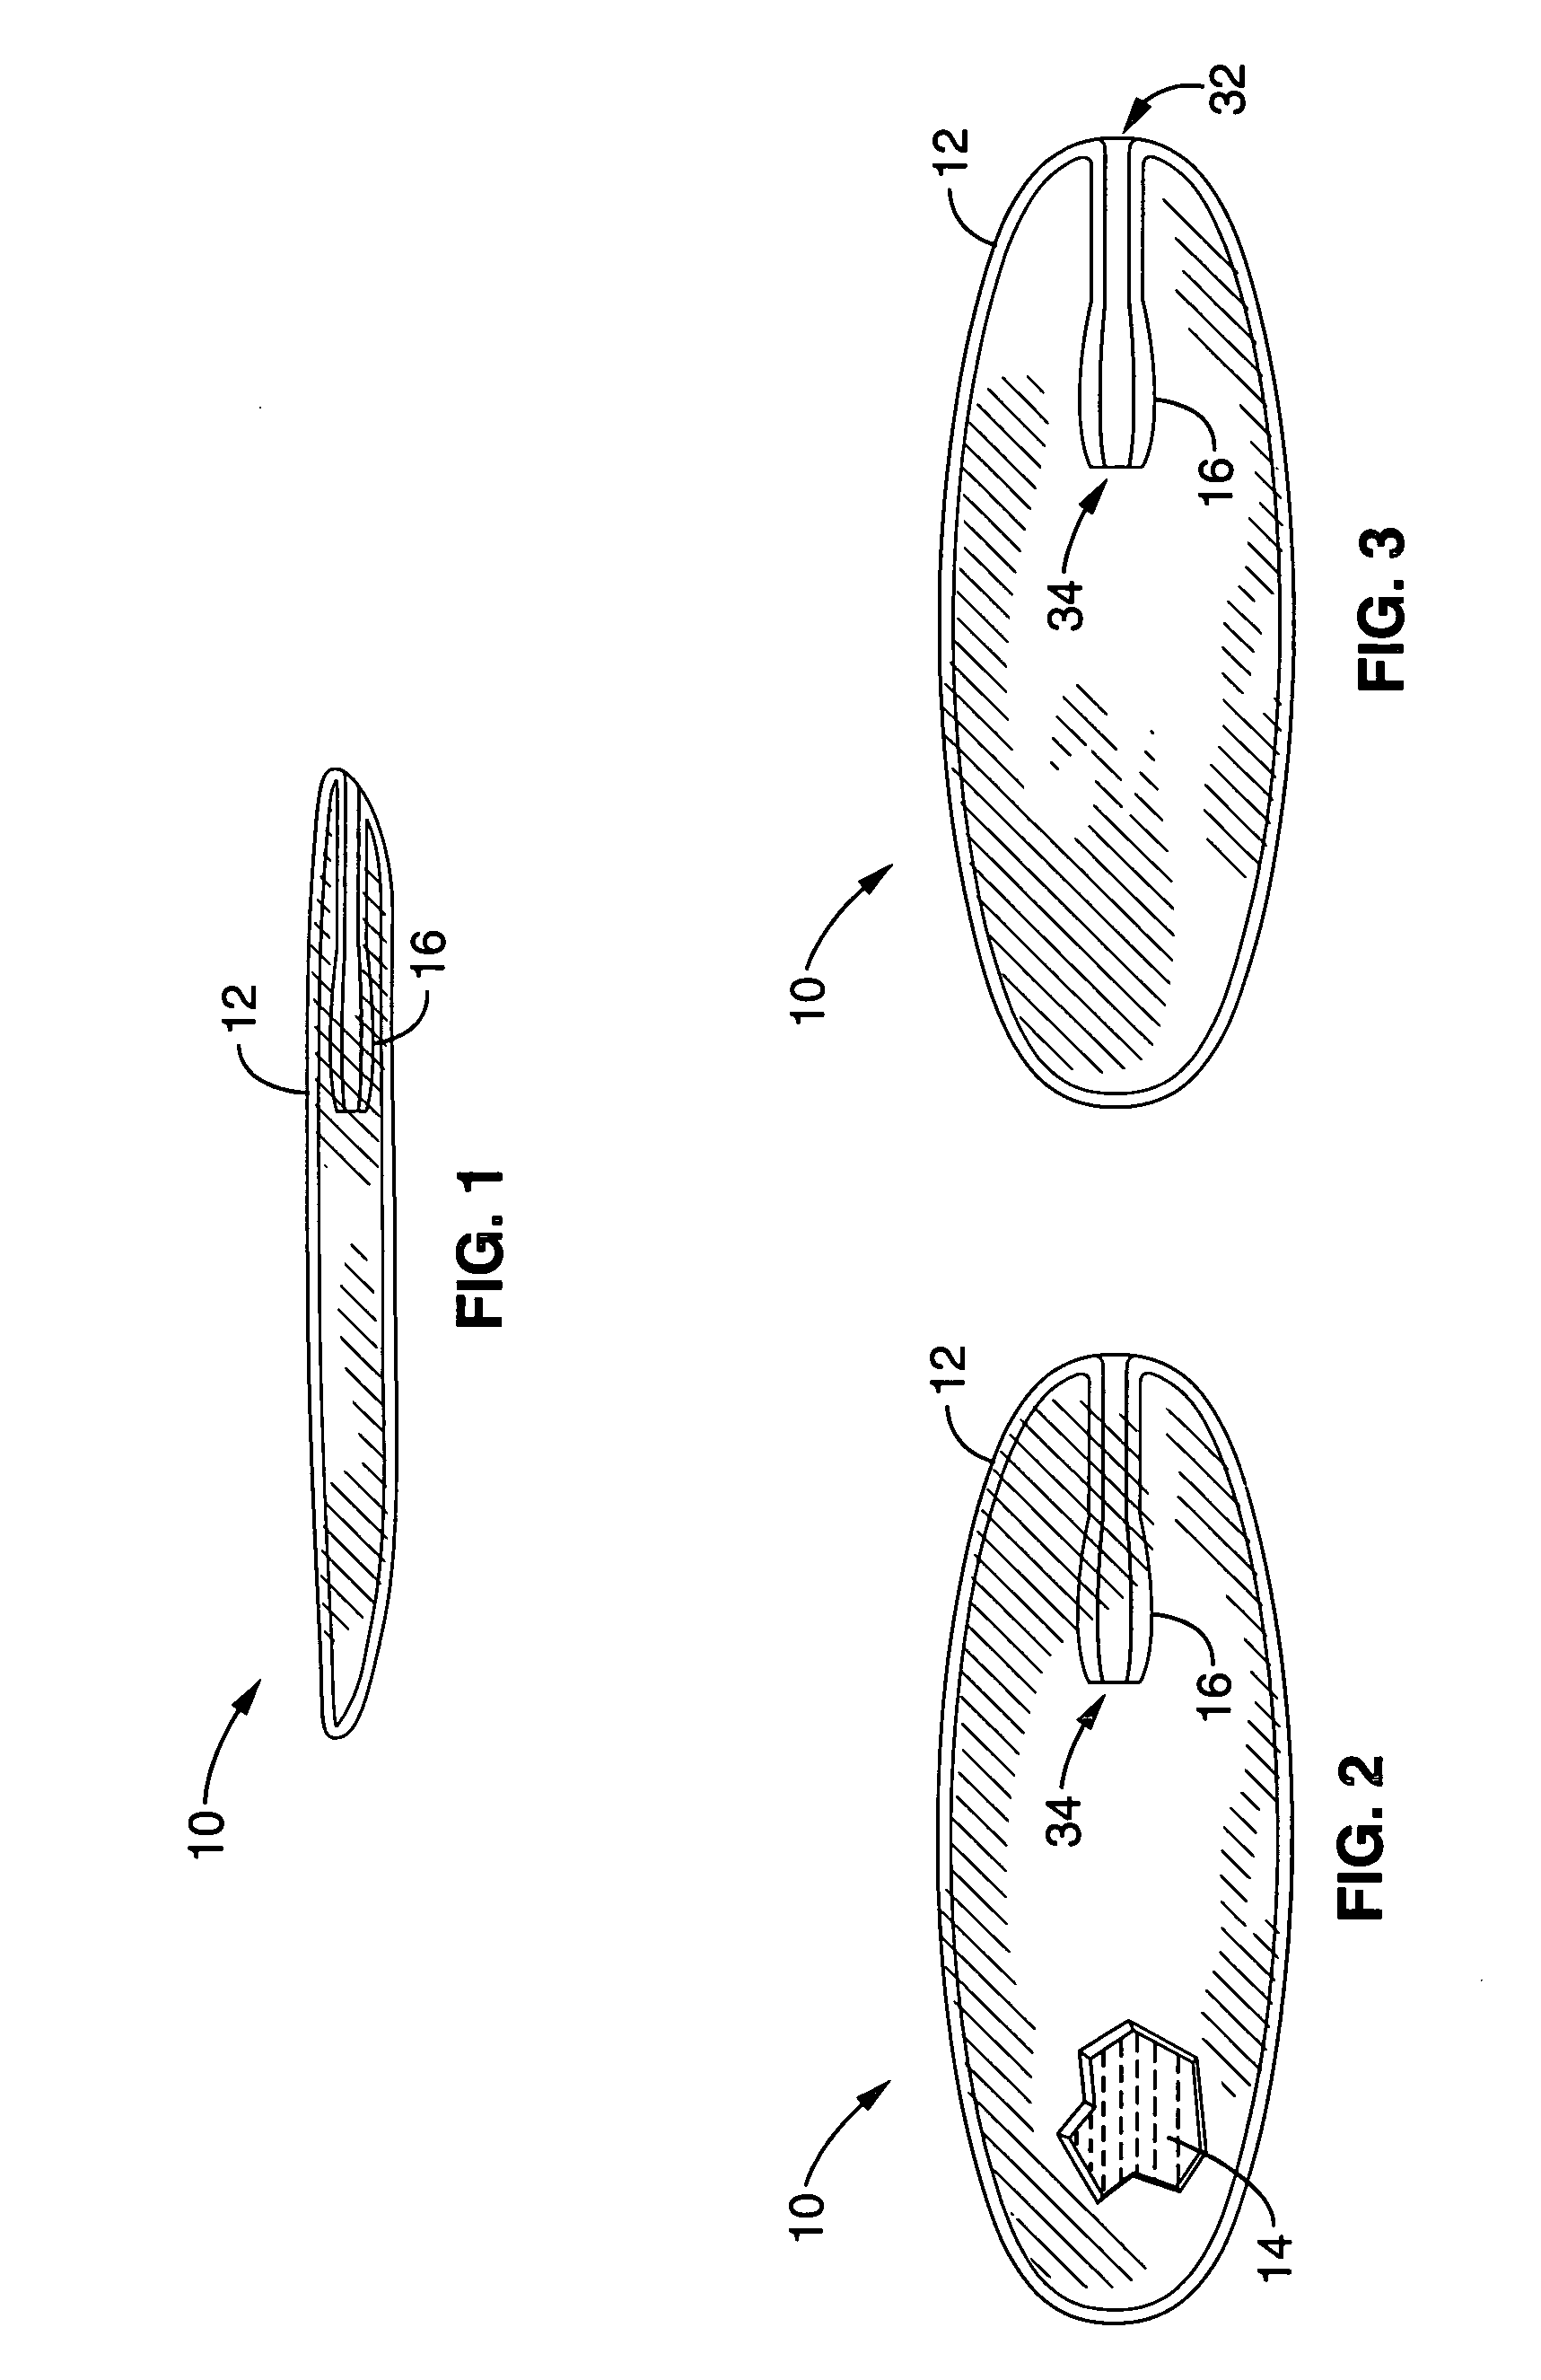 Systems, devices and methods for treatment of intervertebral disorders